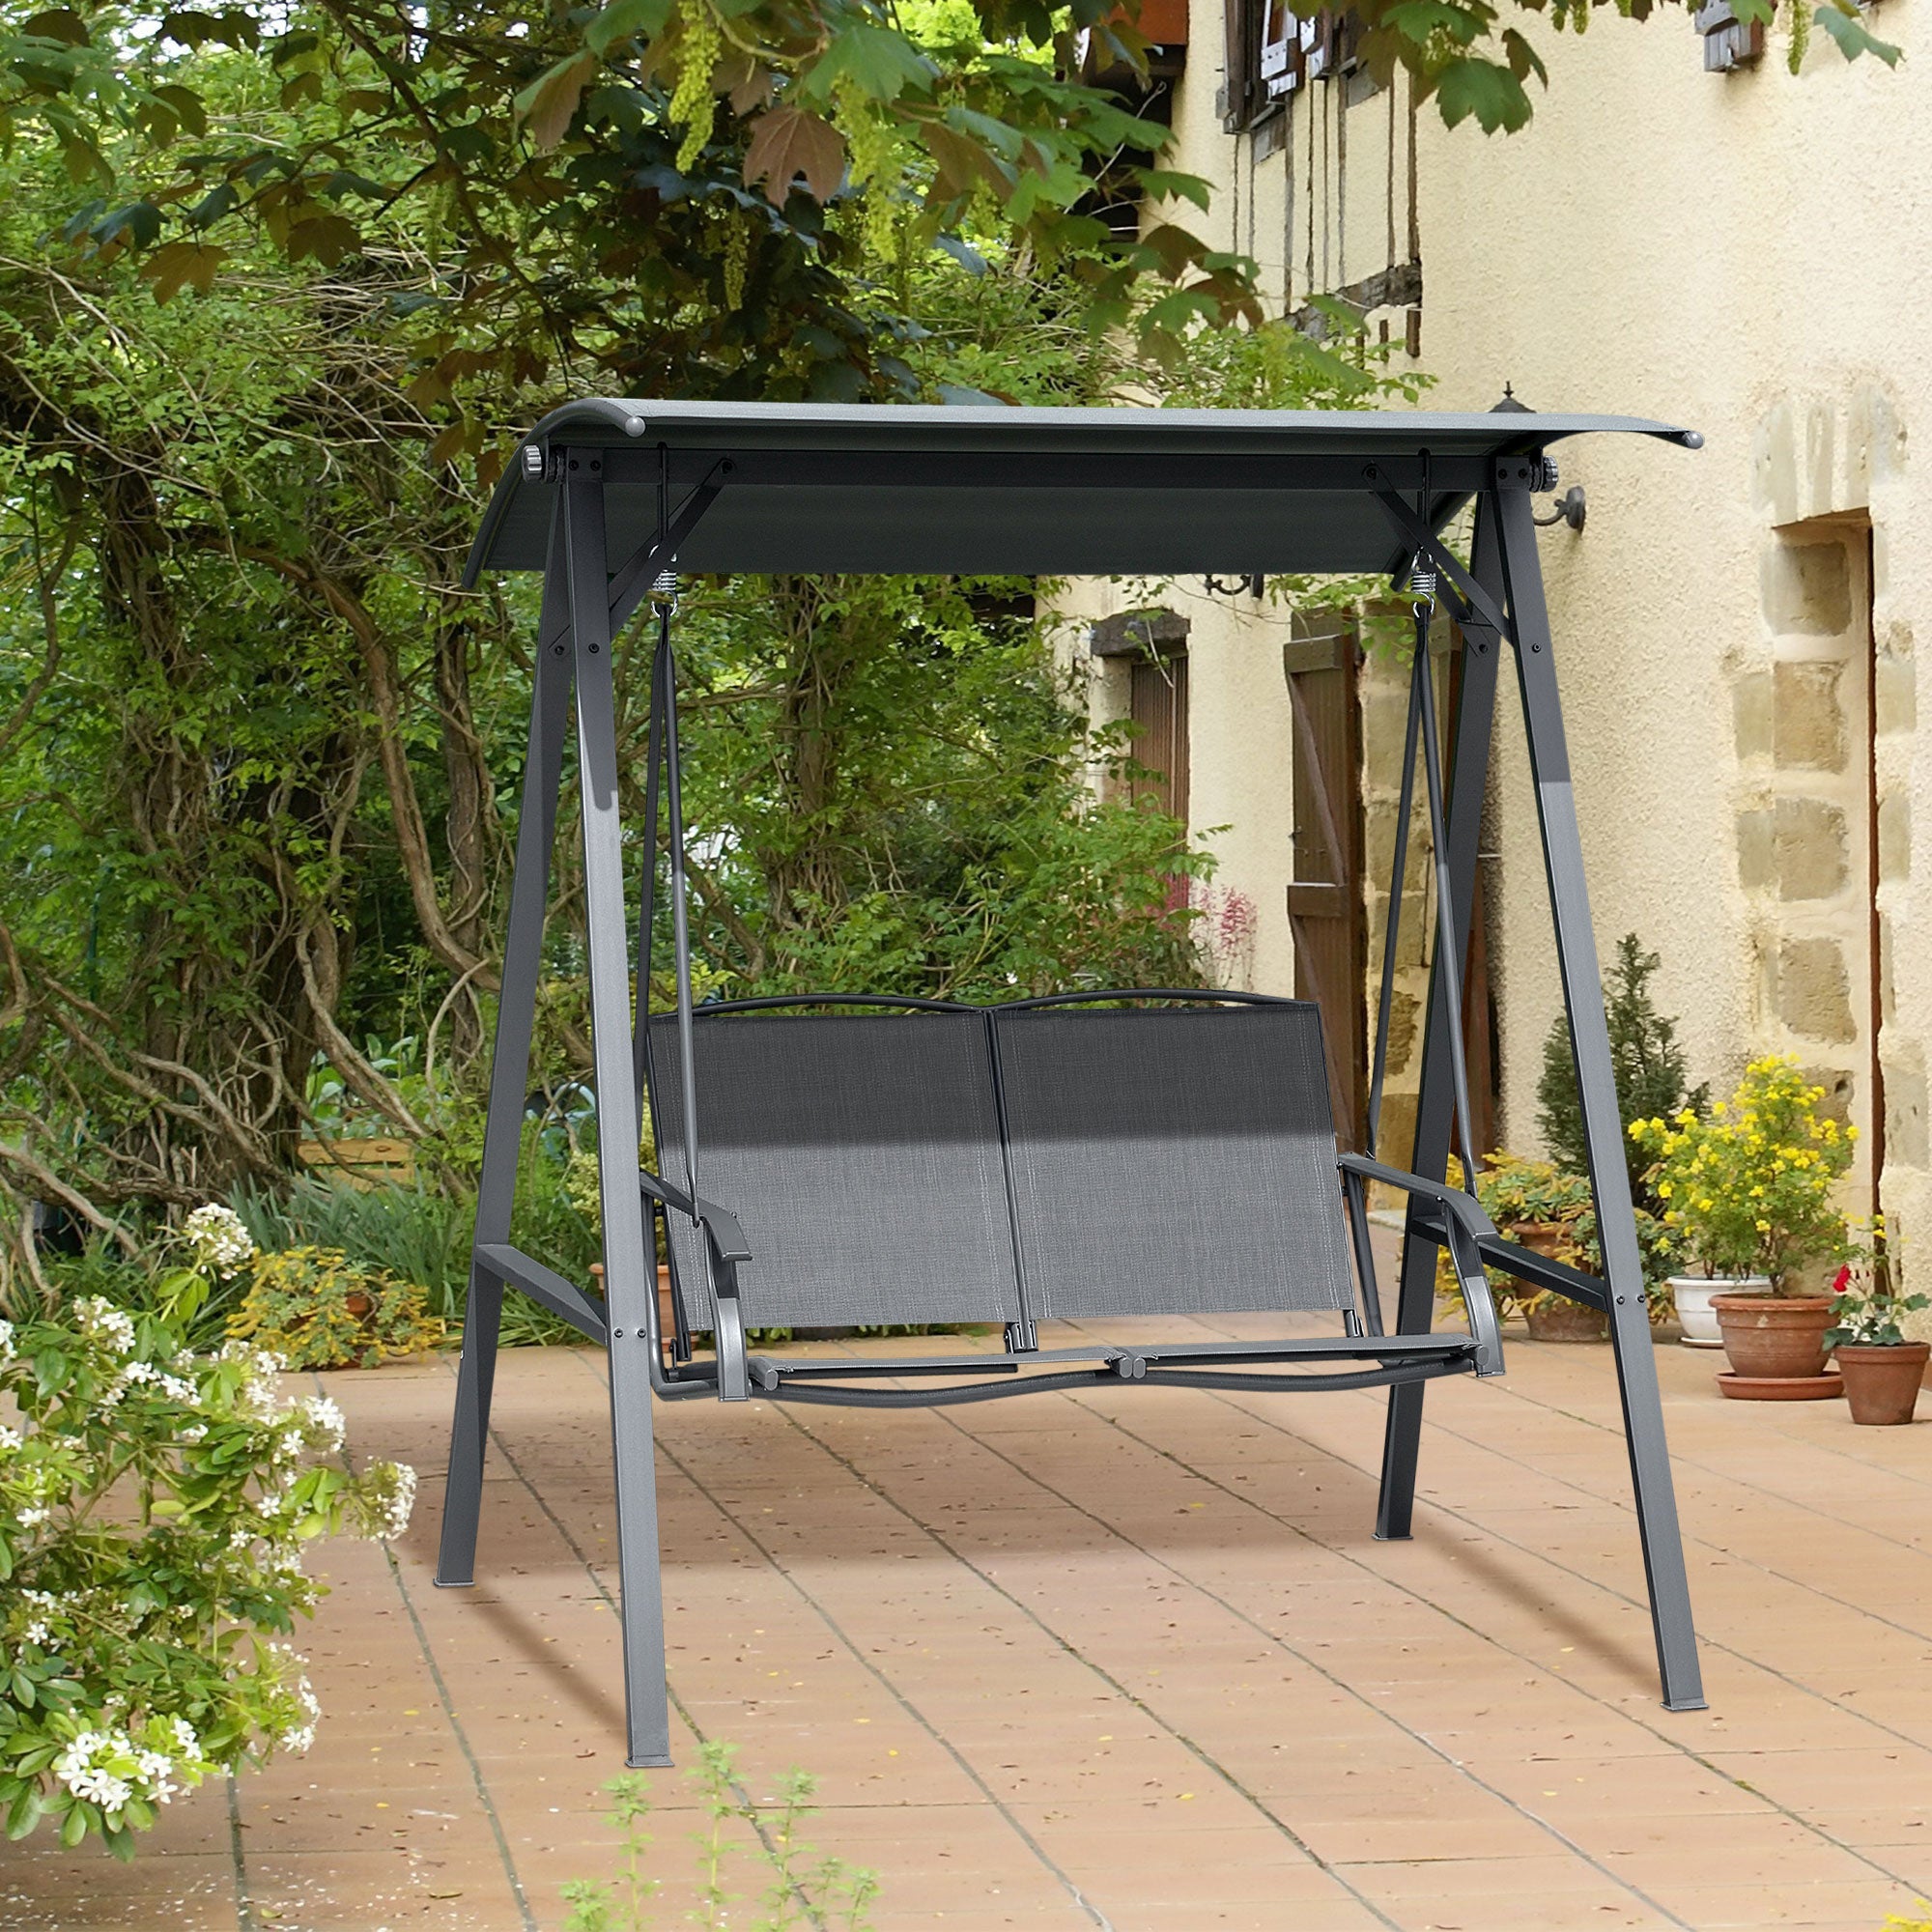 Outsunny 2 Seater Garden Swing Chair Outdoor Canopy Swing Bench with Adjustable Shade and Metal Frame Dark Grey